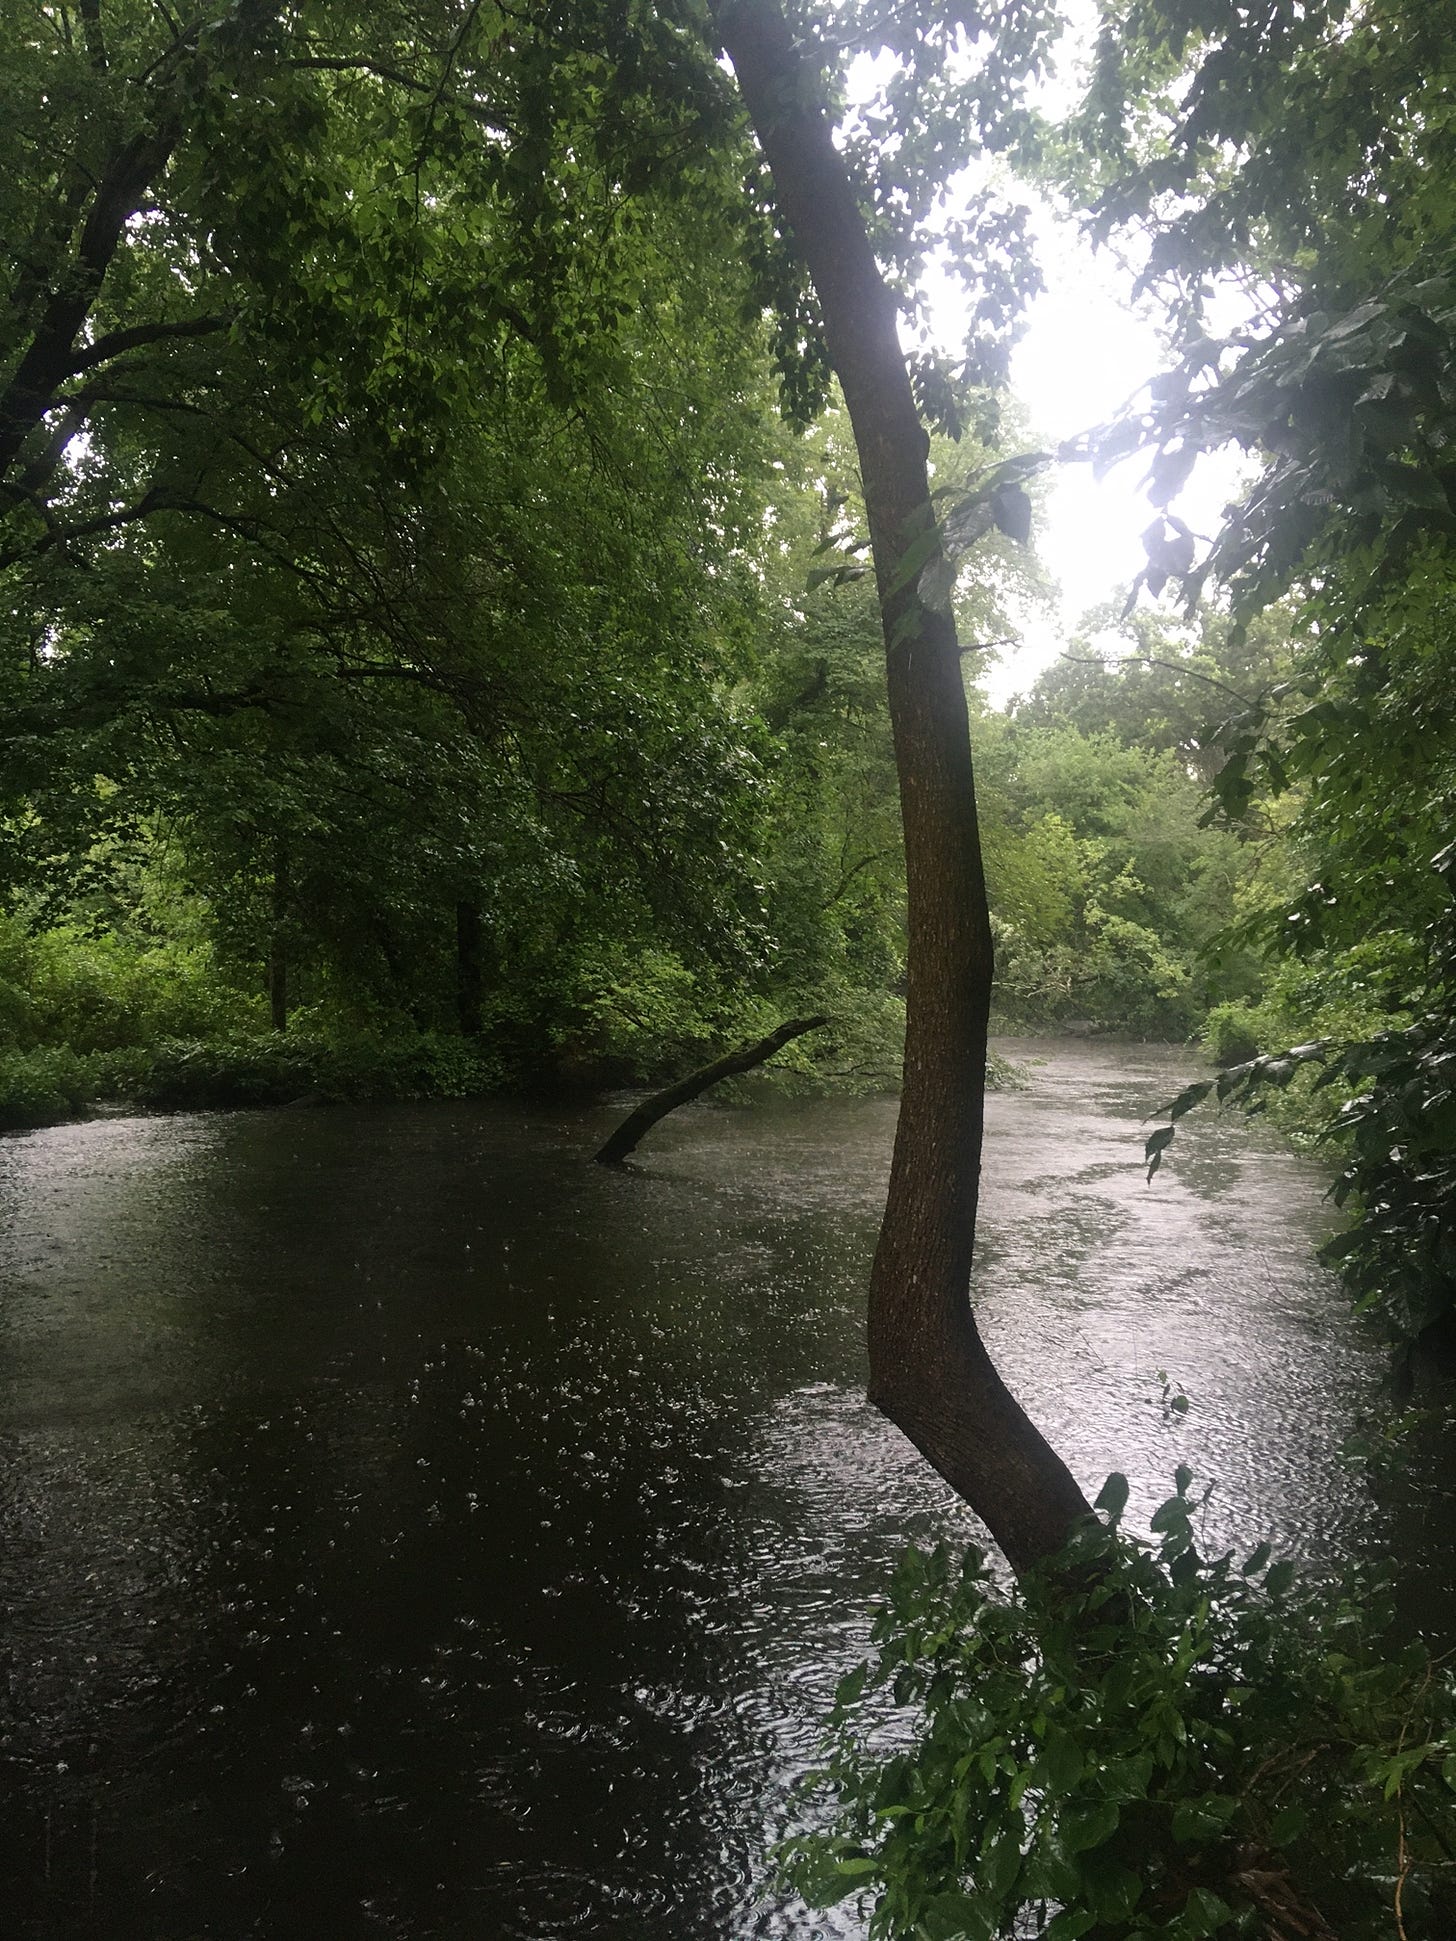 A wooded river almost overflowing its banks on a rainy day